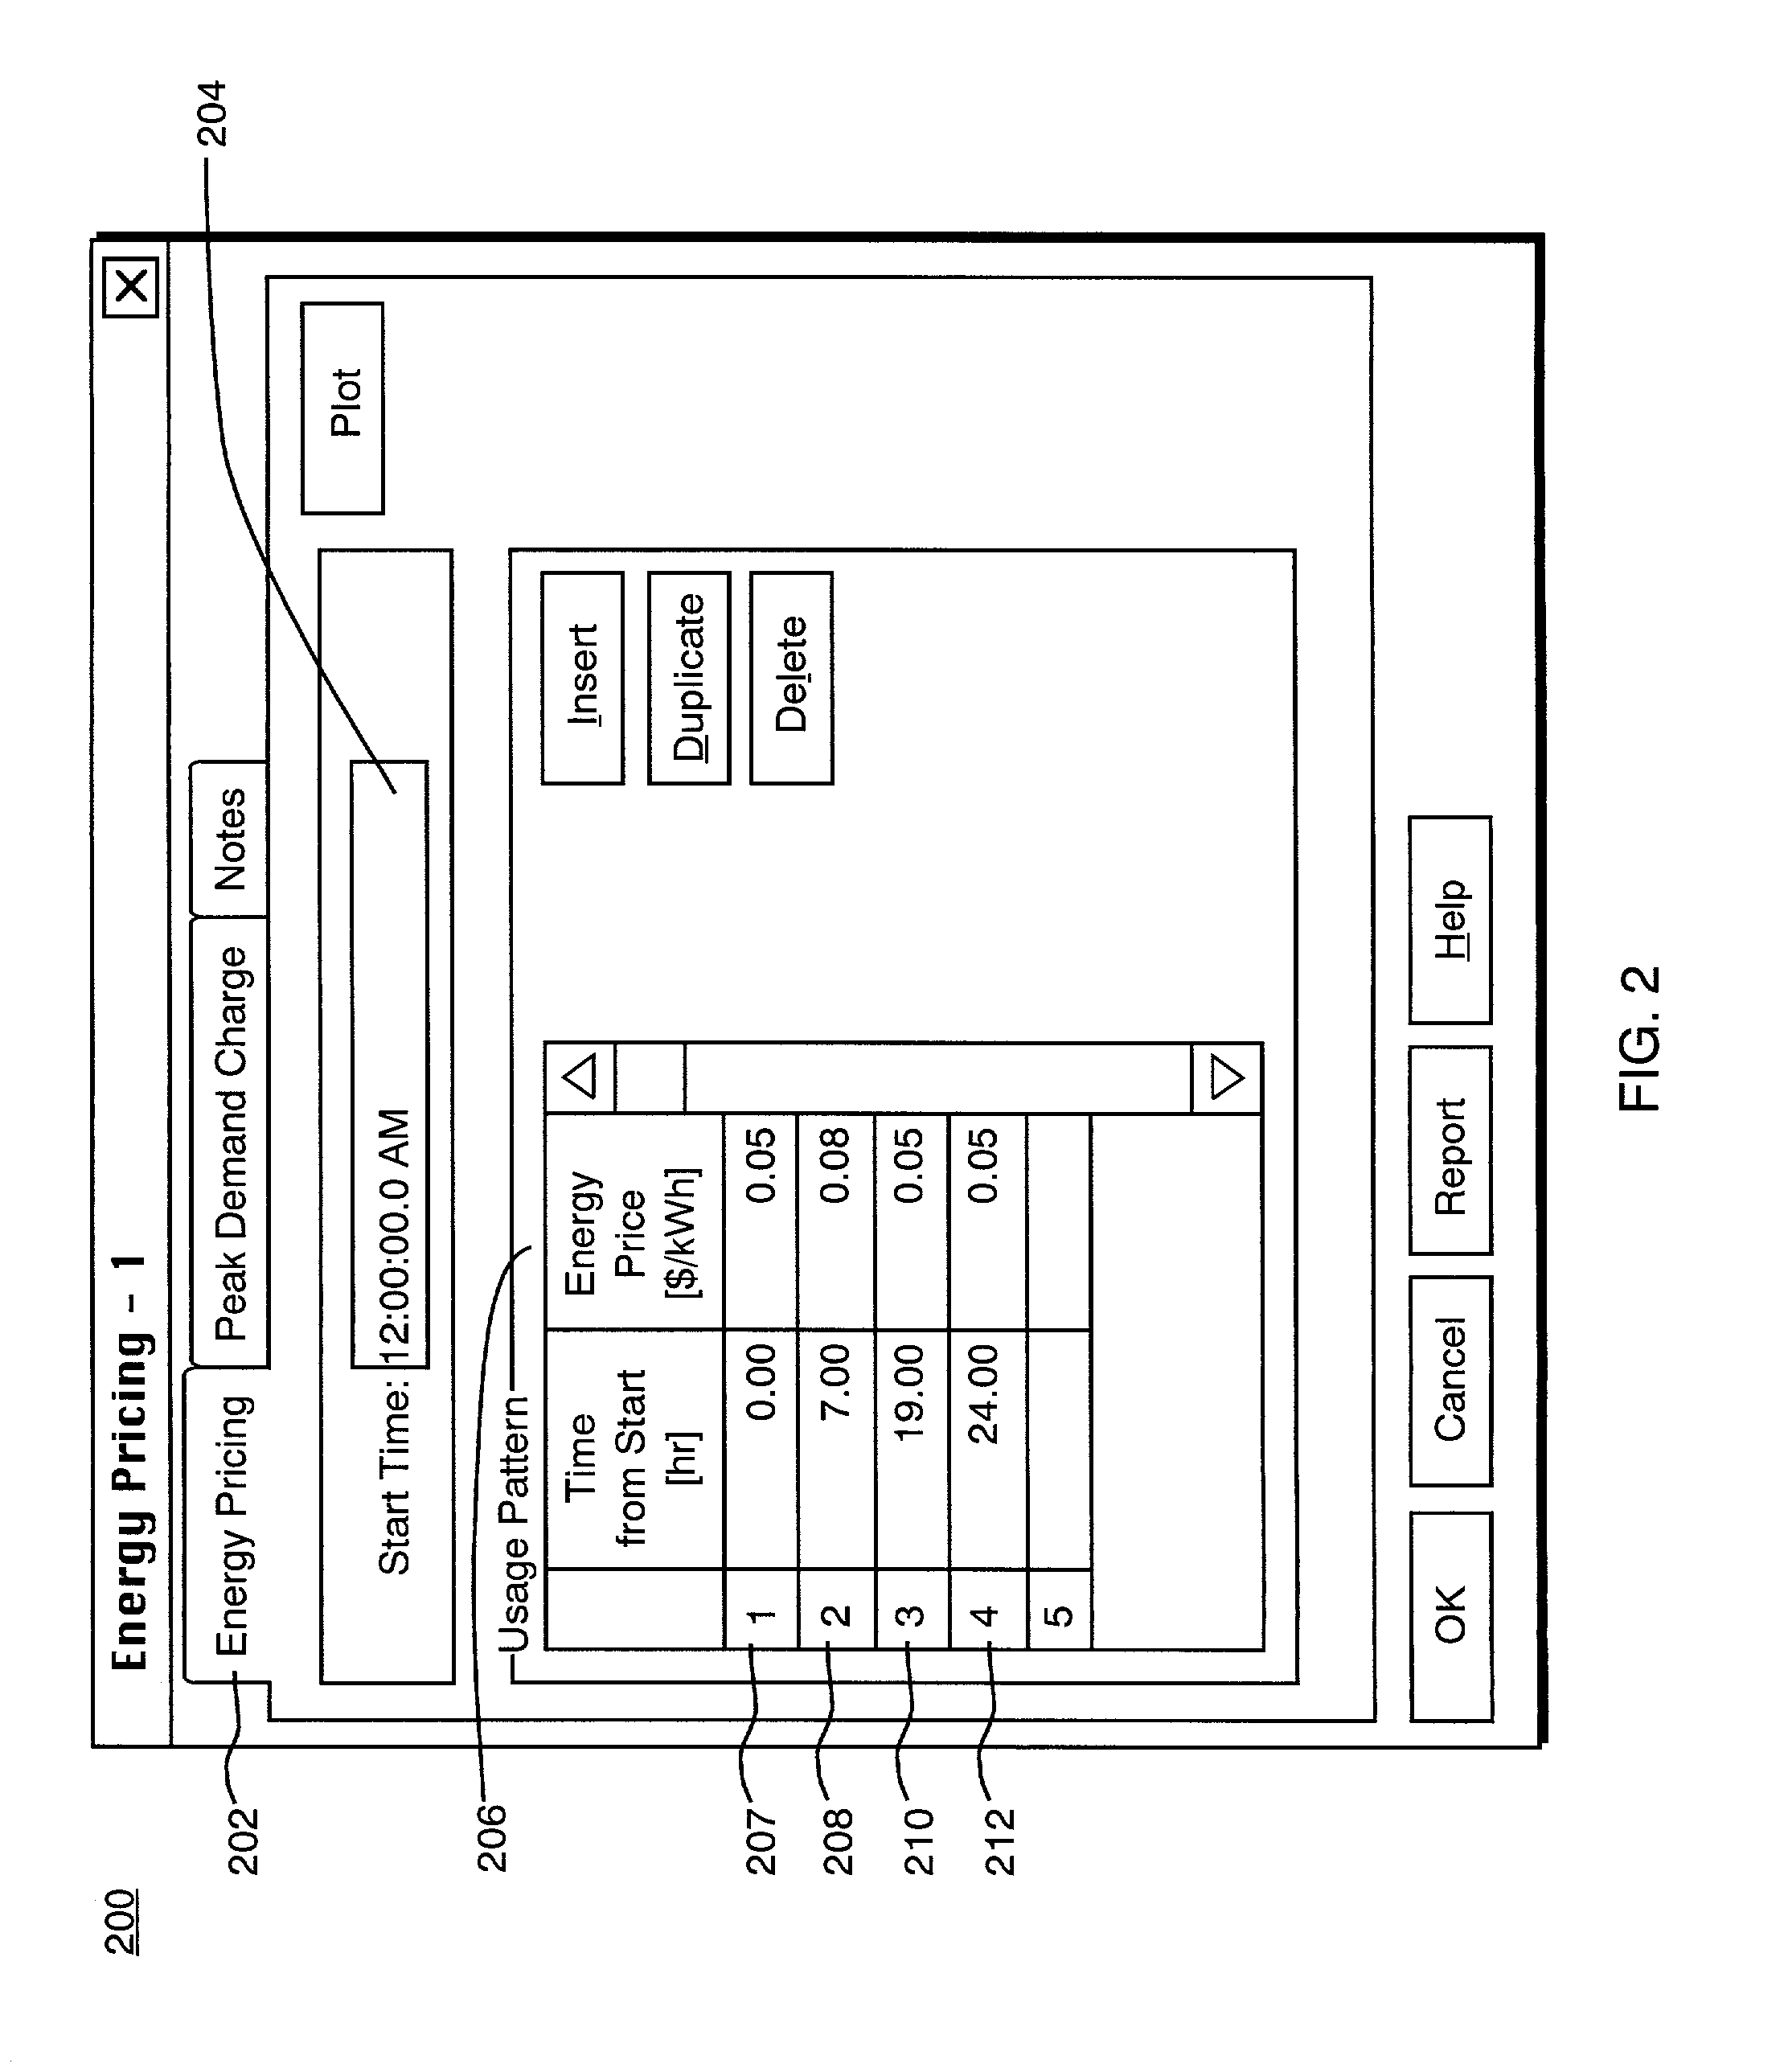 Method and system for providing an energy cost estimation for a water distribution network